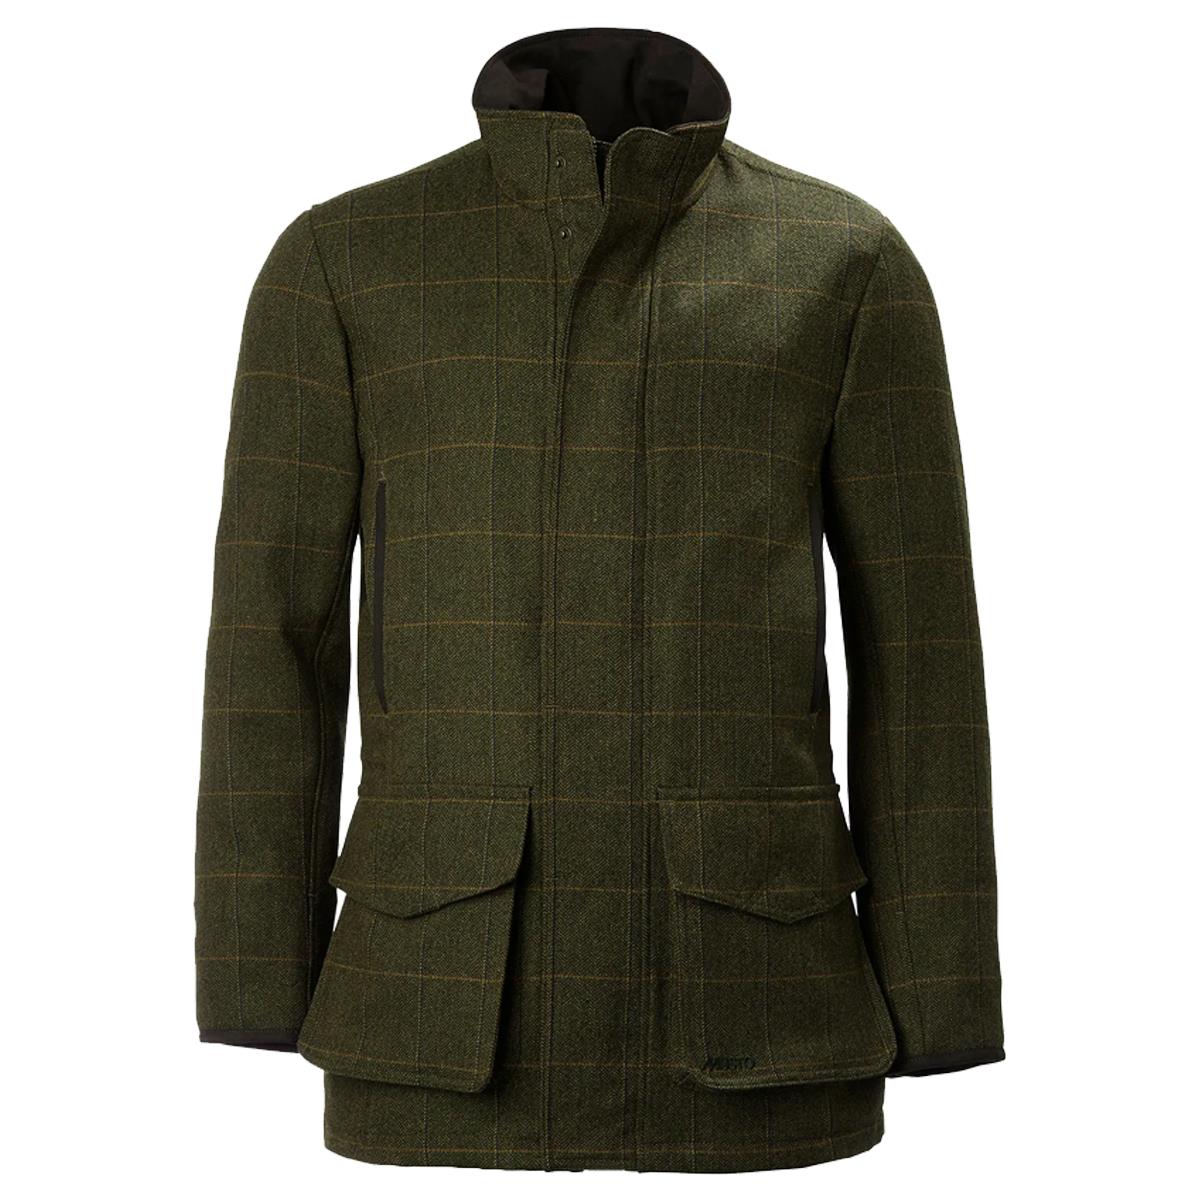 Musto Tweed Jacket Questions & Answers